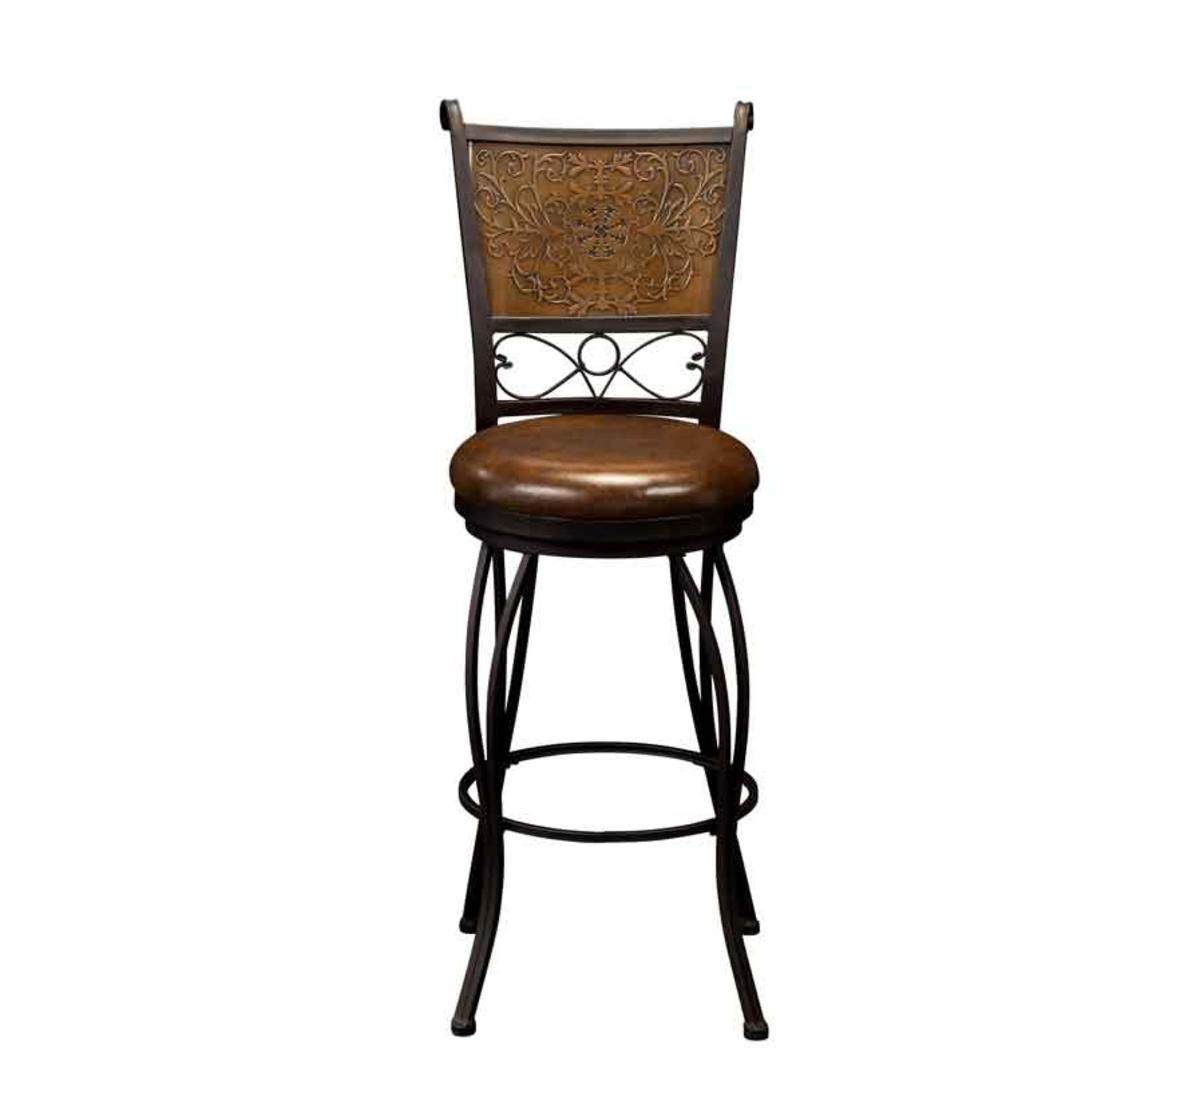 Barstool Bad Home Furniture More, Pineapple Back Bar Stools With Arms